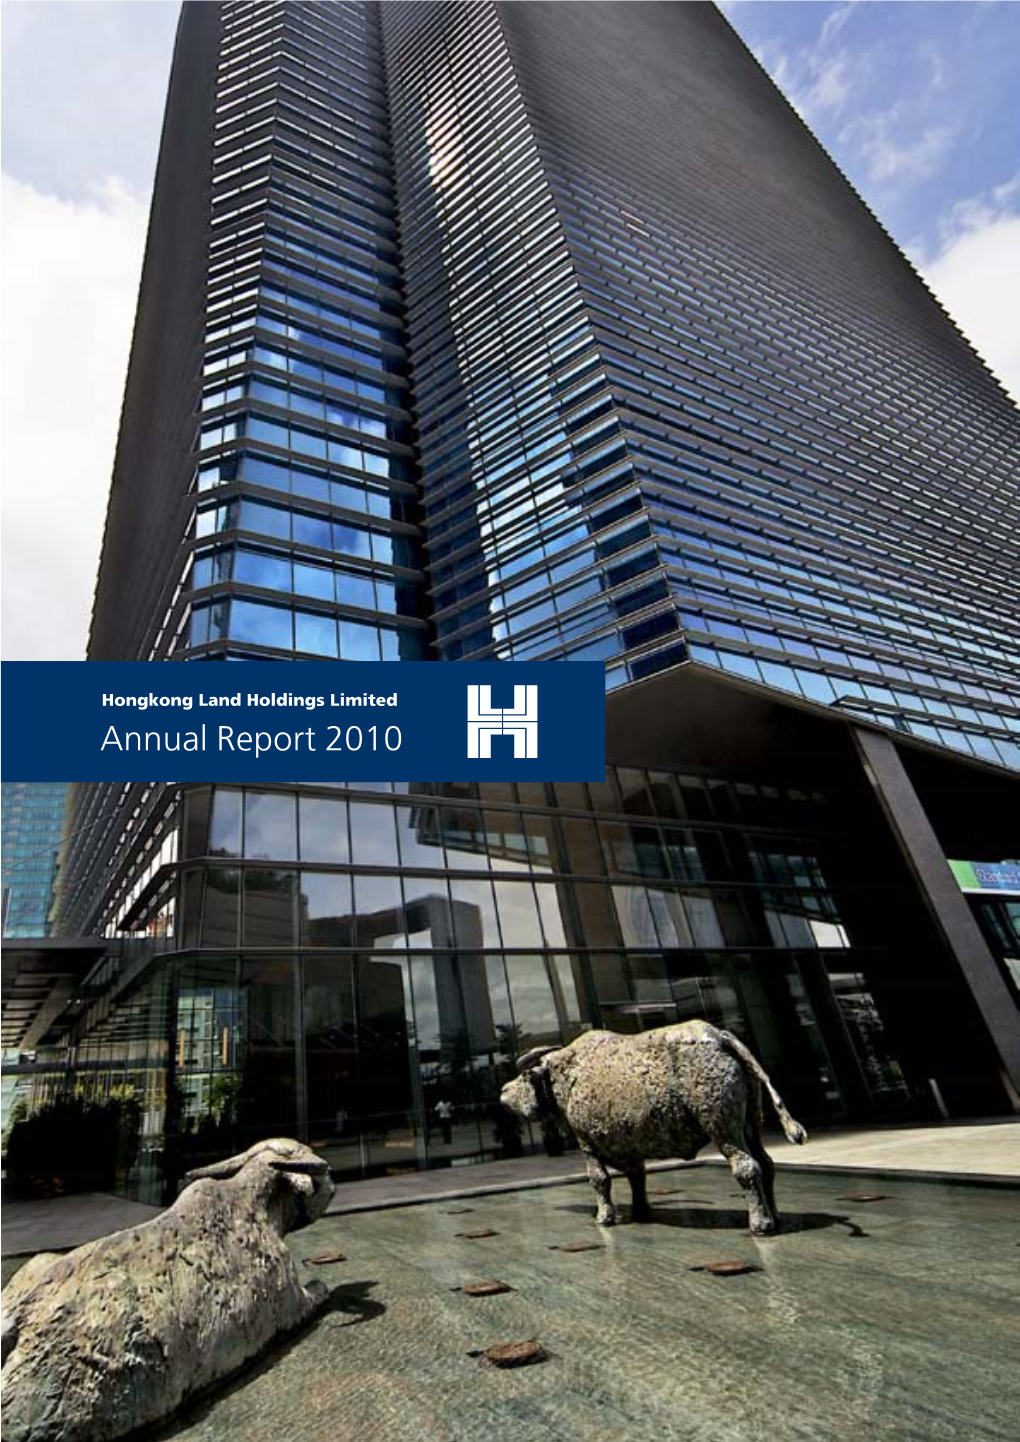 Hongkong Land Holdings Limited Annual Report 2010